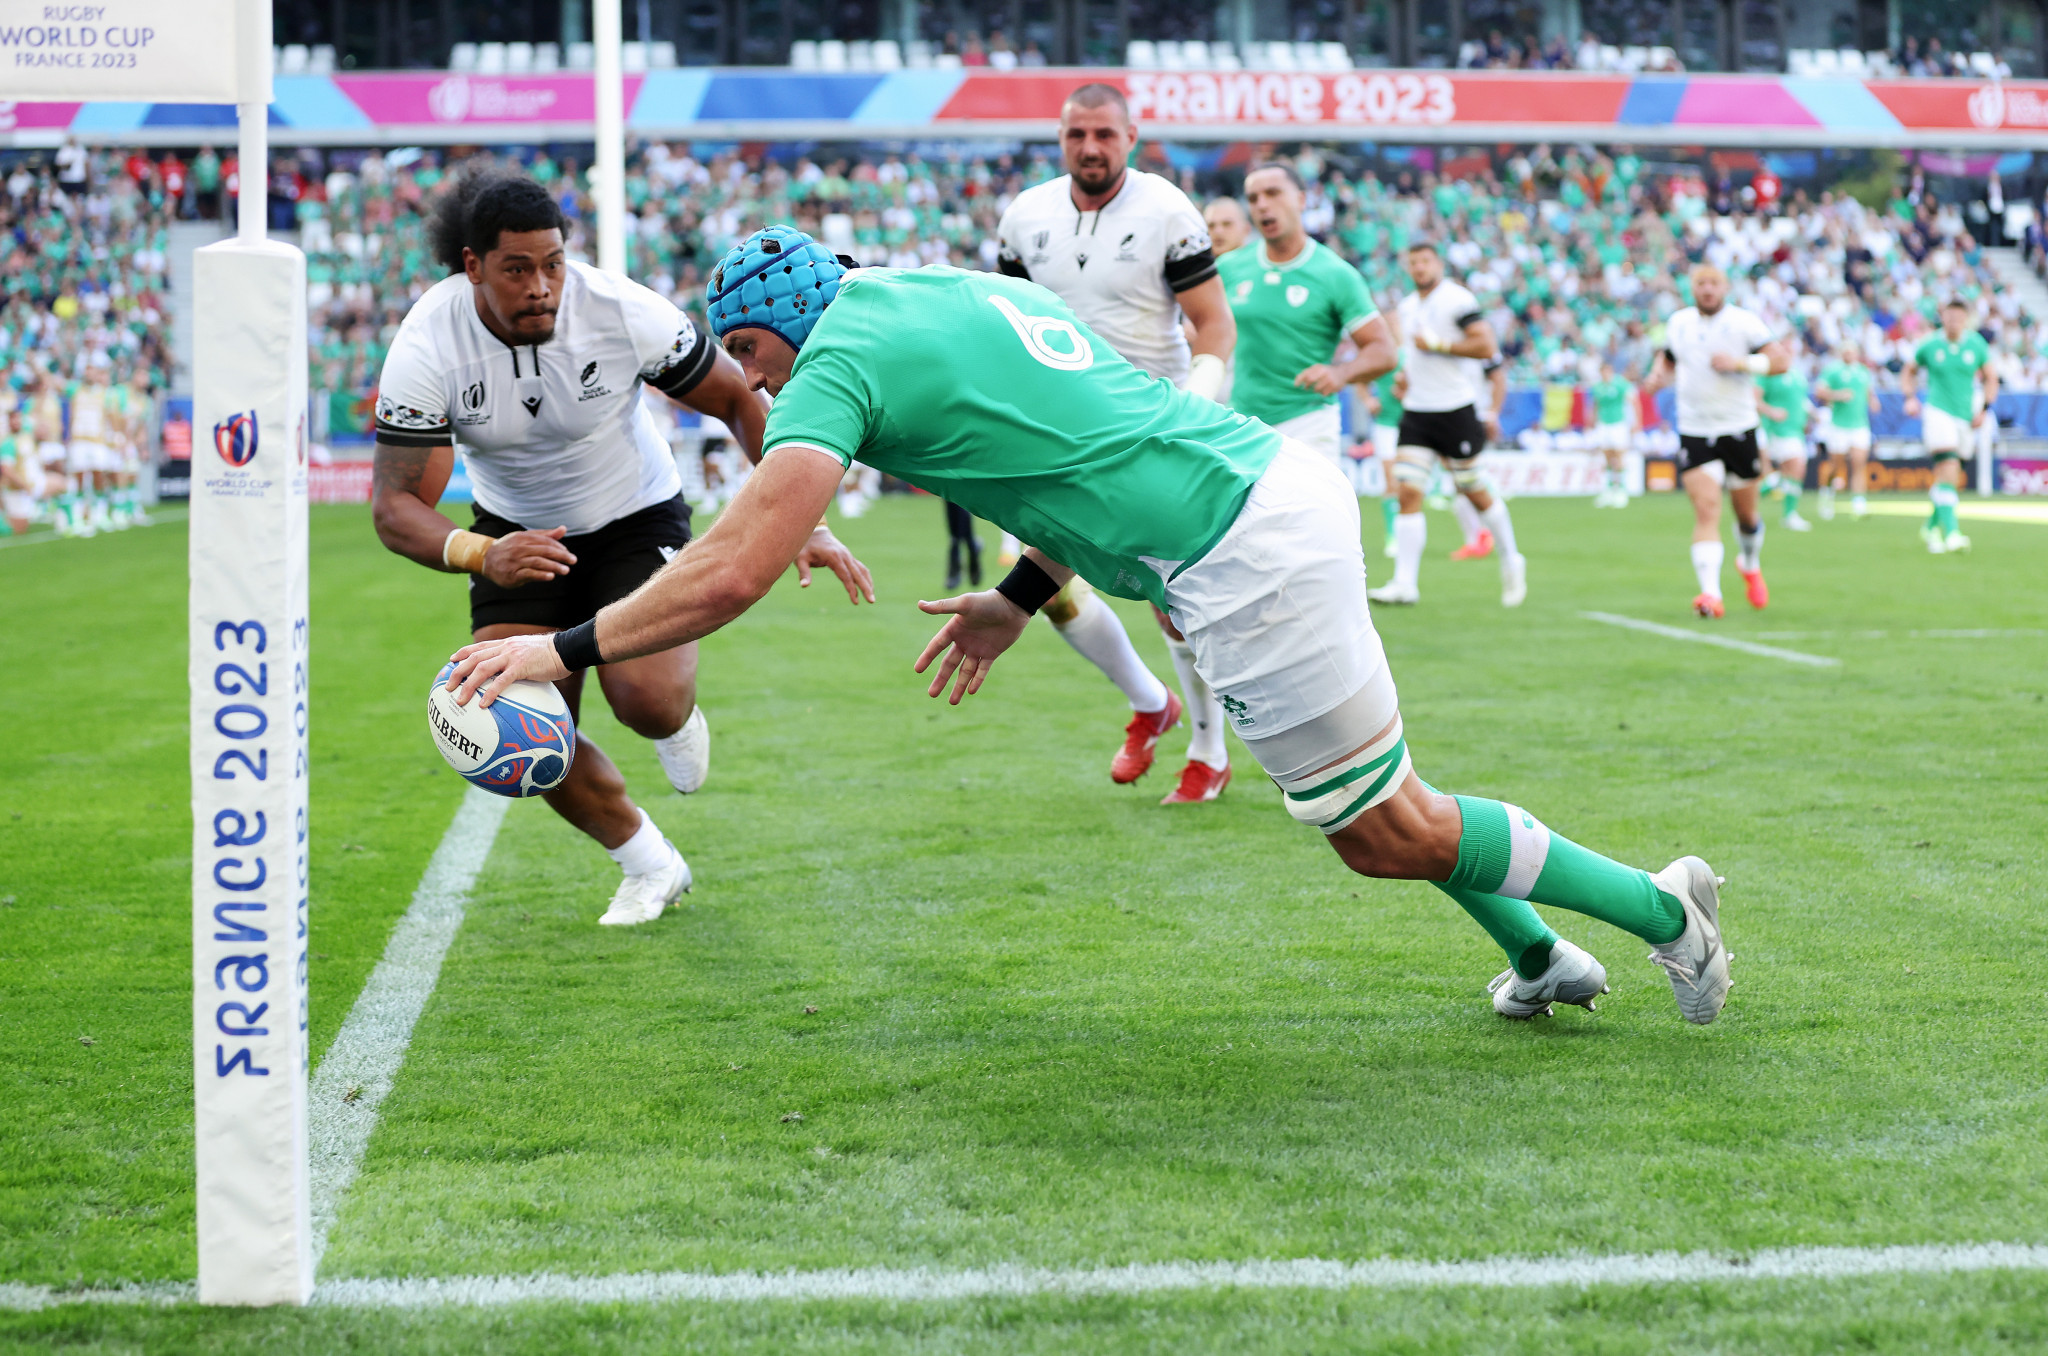 Tadhg Beirne scored in the corner as Ireland overcame Romania despite going behind early on in Bordeaux ©Getty Images